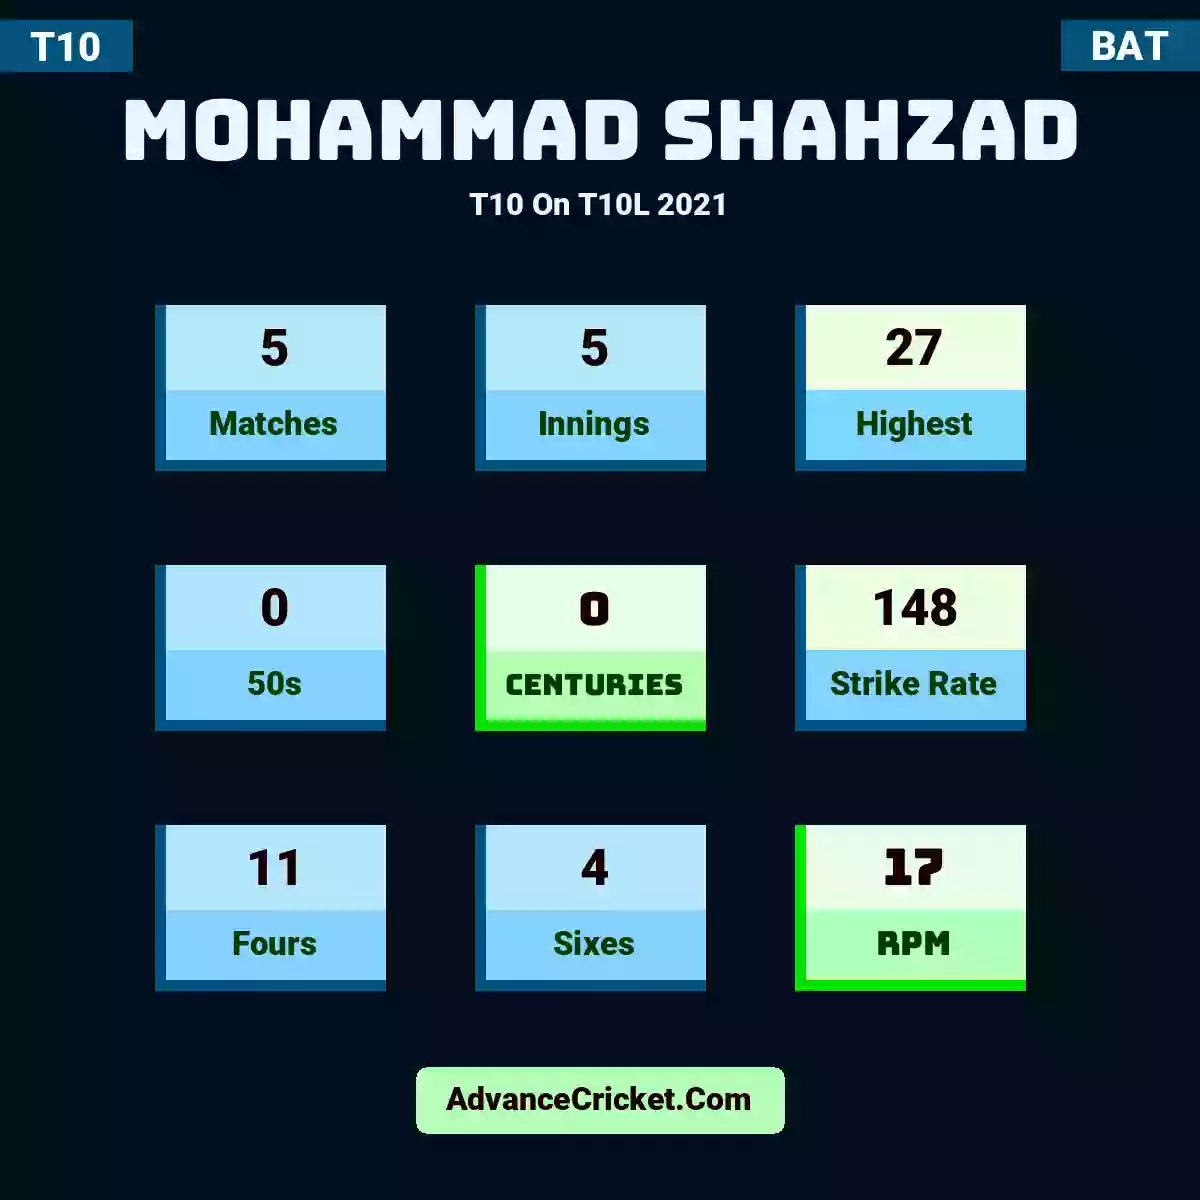 Mohammad Shahzad T10  On T10L 2021, Mohammad Shahzad played 5 matches, scored 27 runs as highest, 0 half-centuries, and 0 centuries, with a strike rate of 148. M.Shahzad hit 11 fours and 4 sixes, with an RPM of 17.